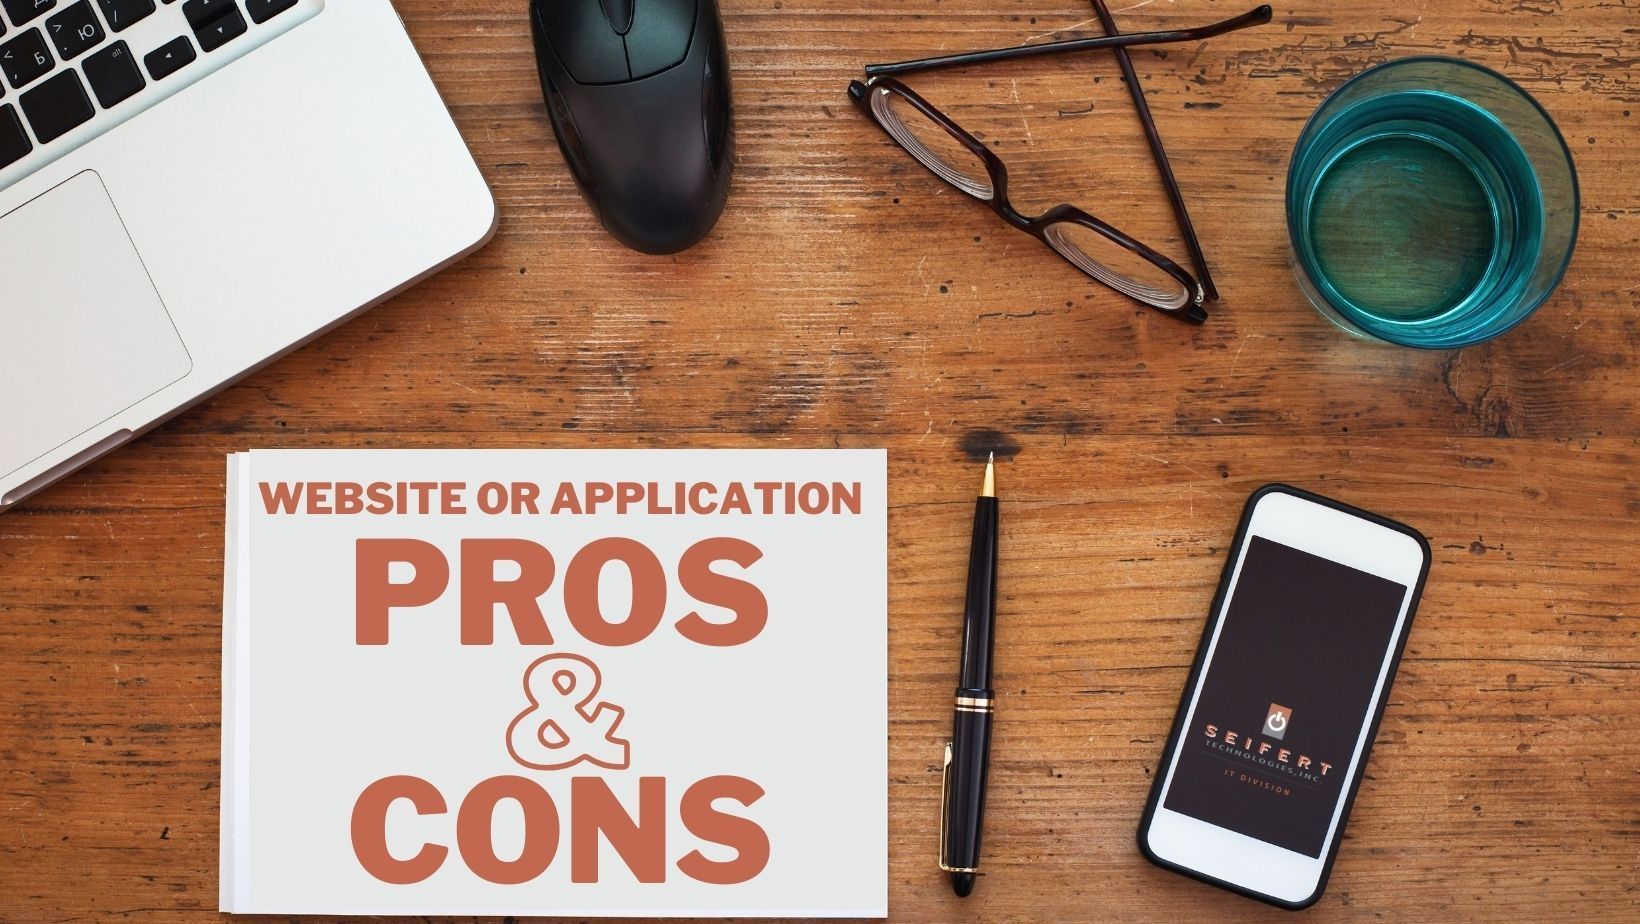 Website or Mobile App? What are the Pros and Cons?